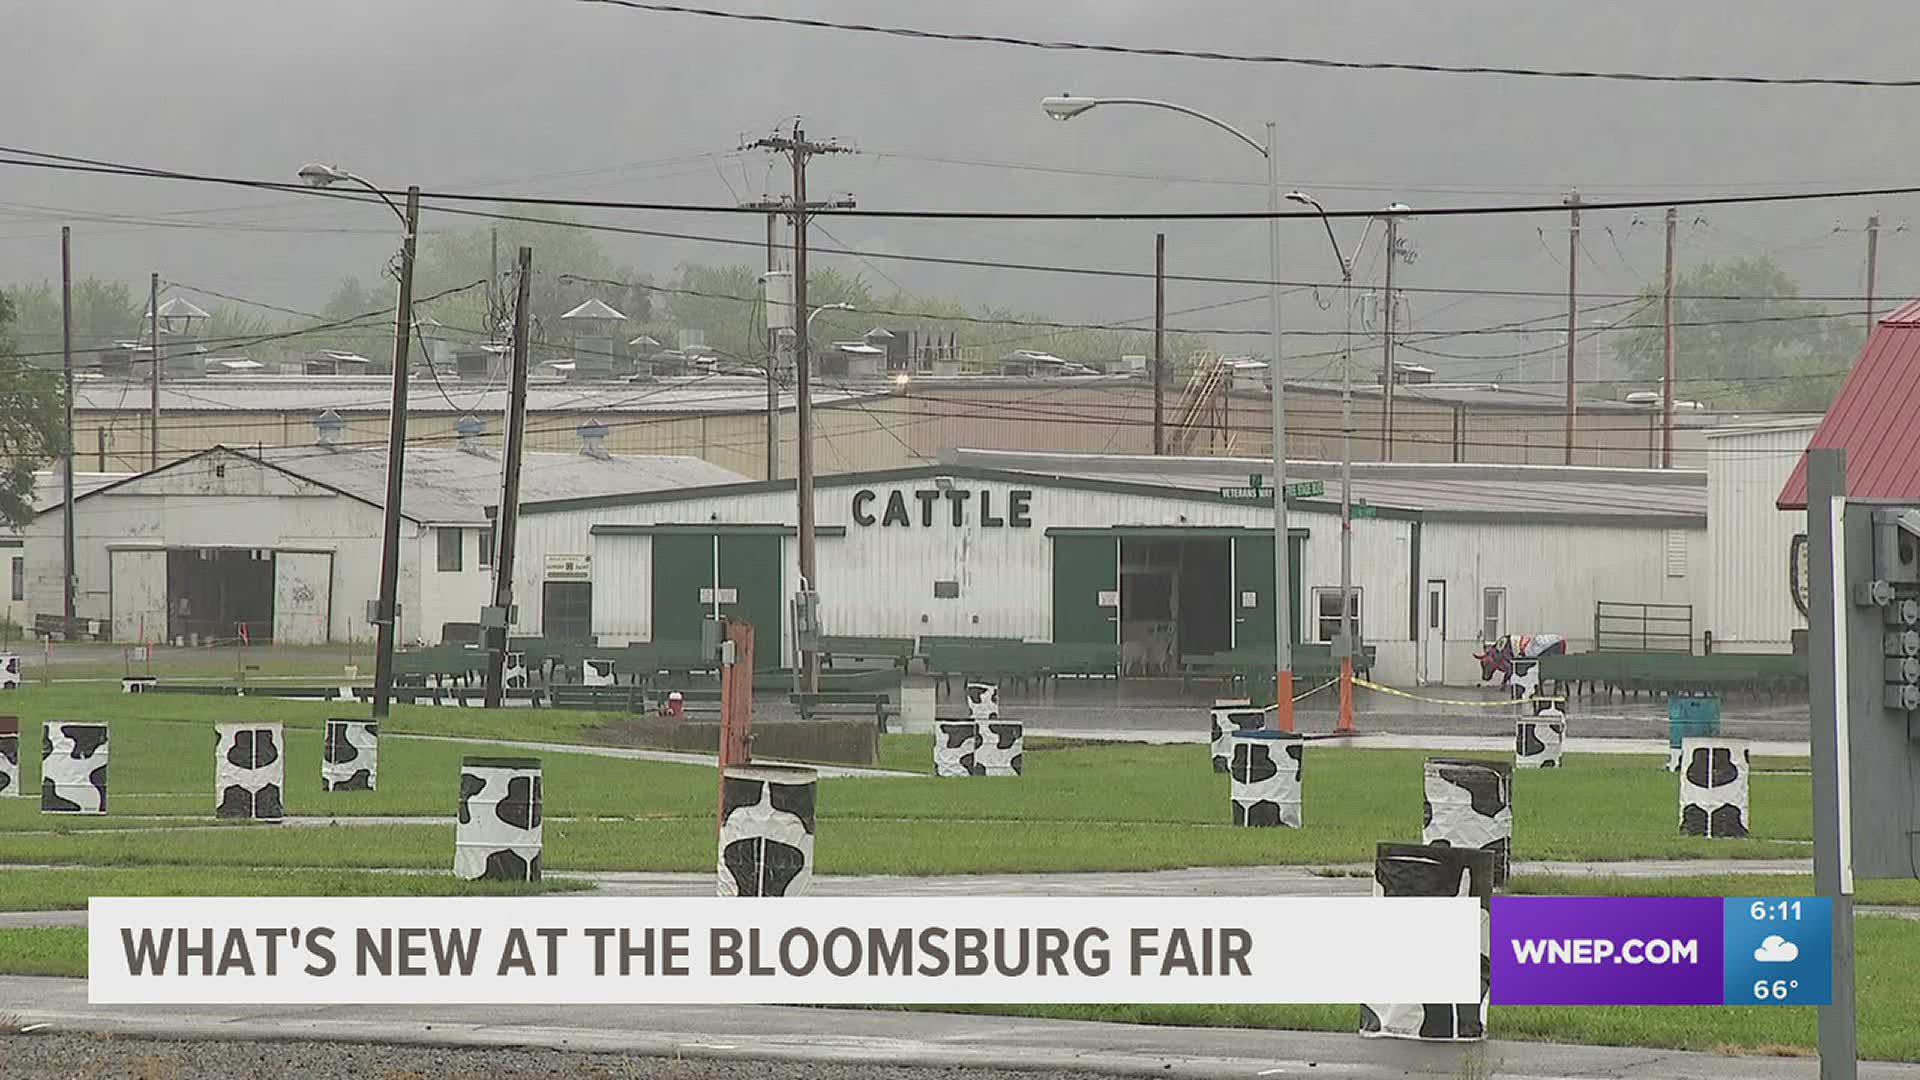 Bloomsburg Fair officials told Newswatch 16 about new additions to the event.